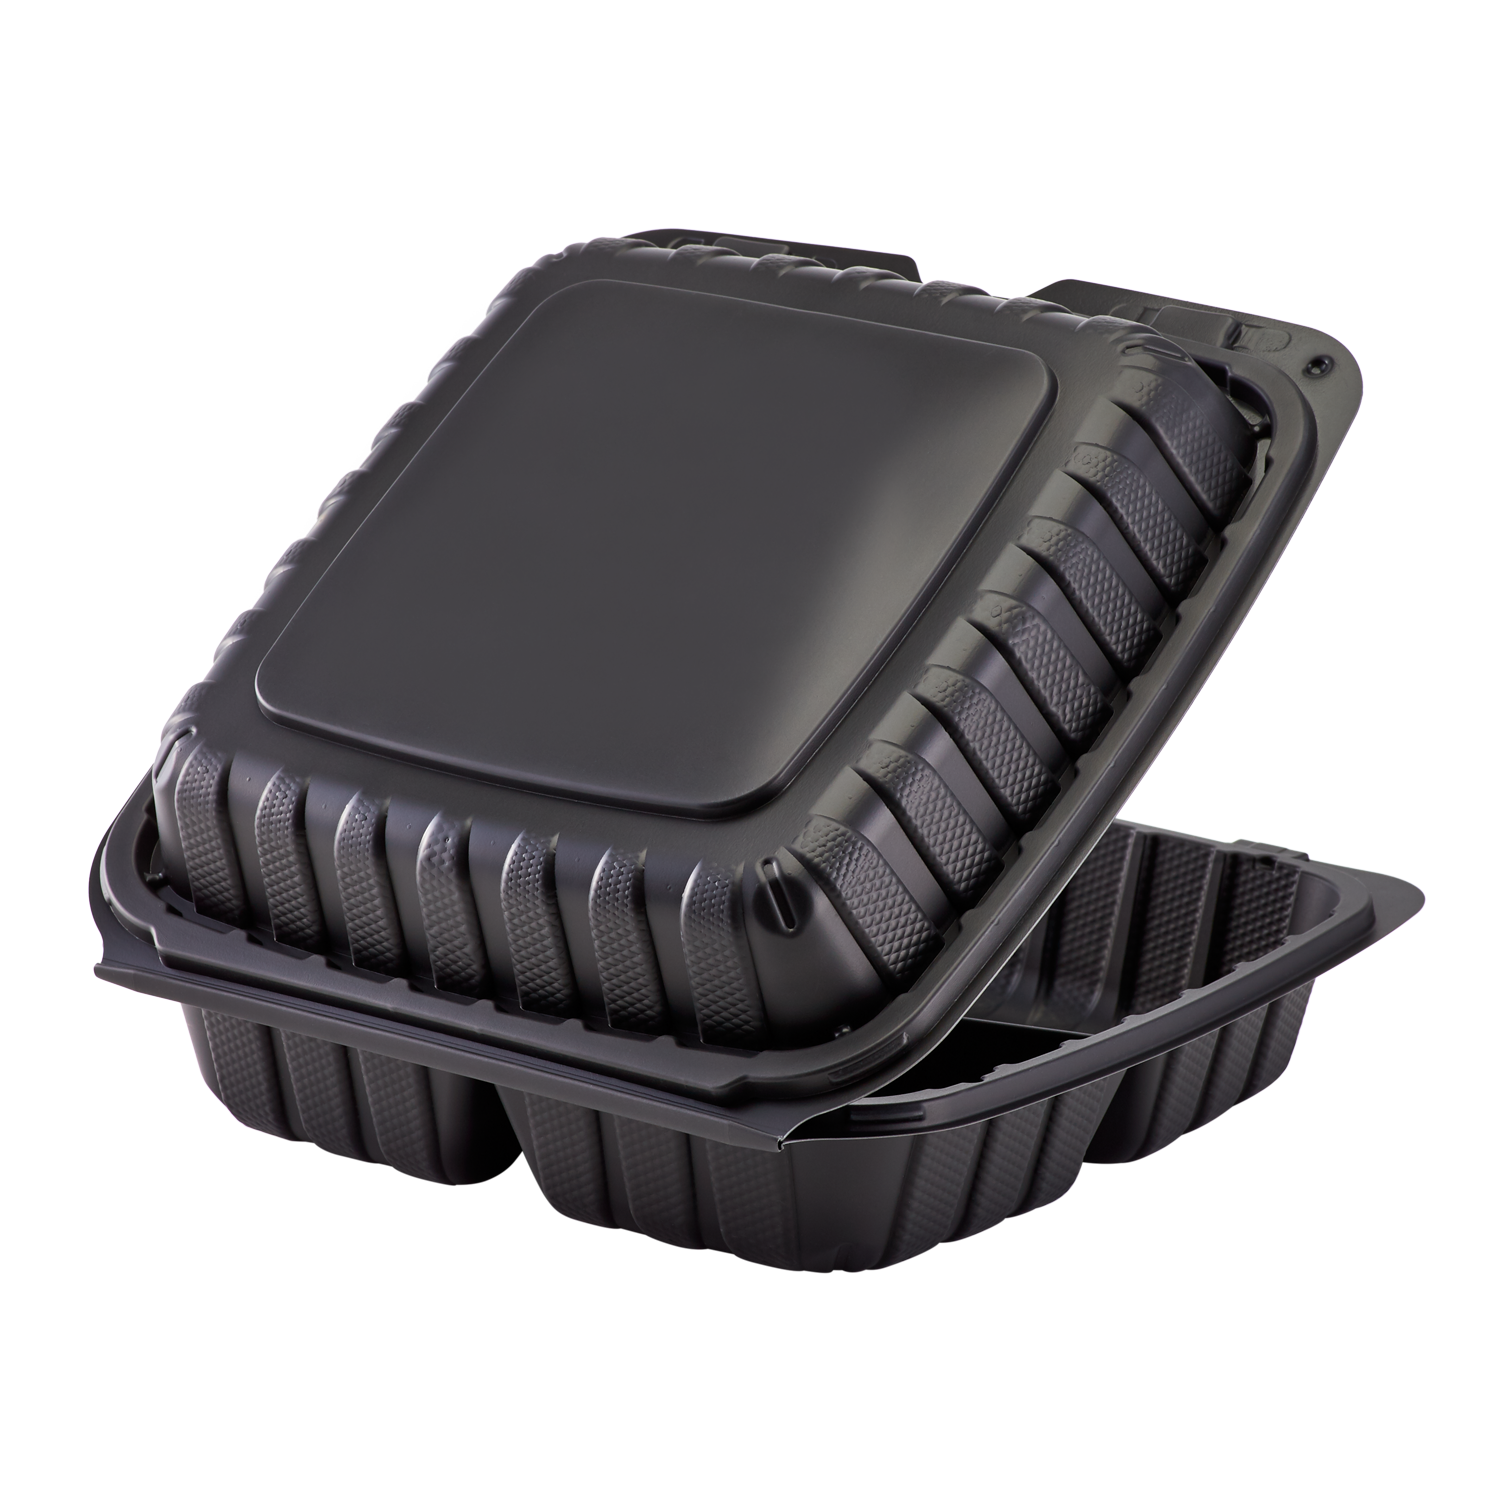 Black Plastic Square 9in 3-Compartment Take Out Container 1ct